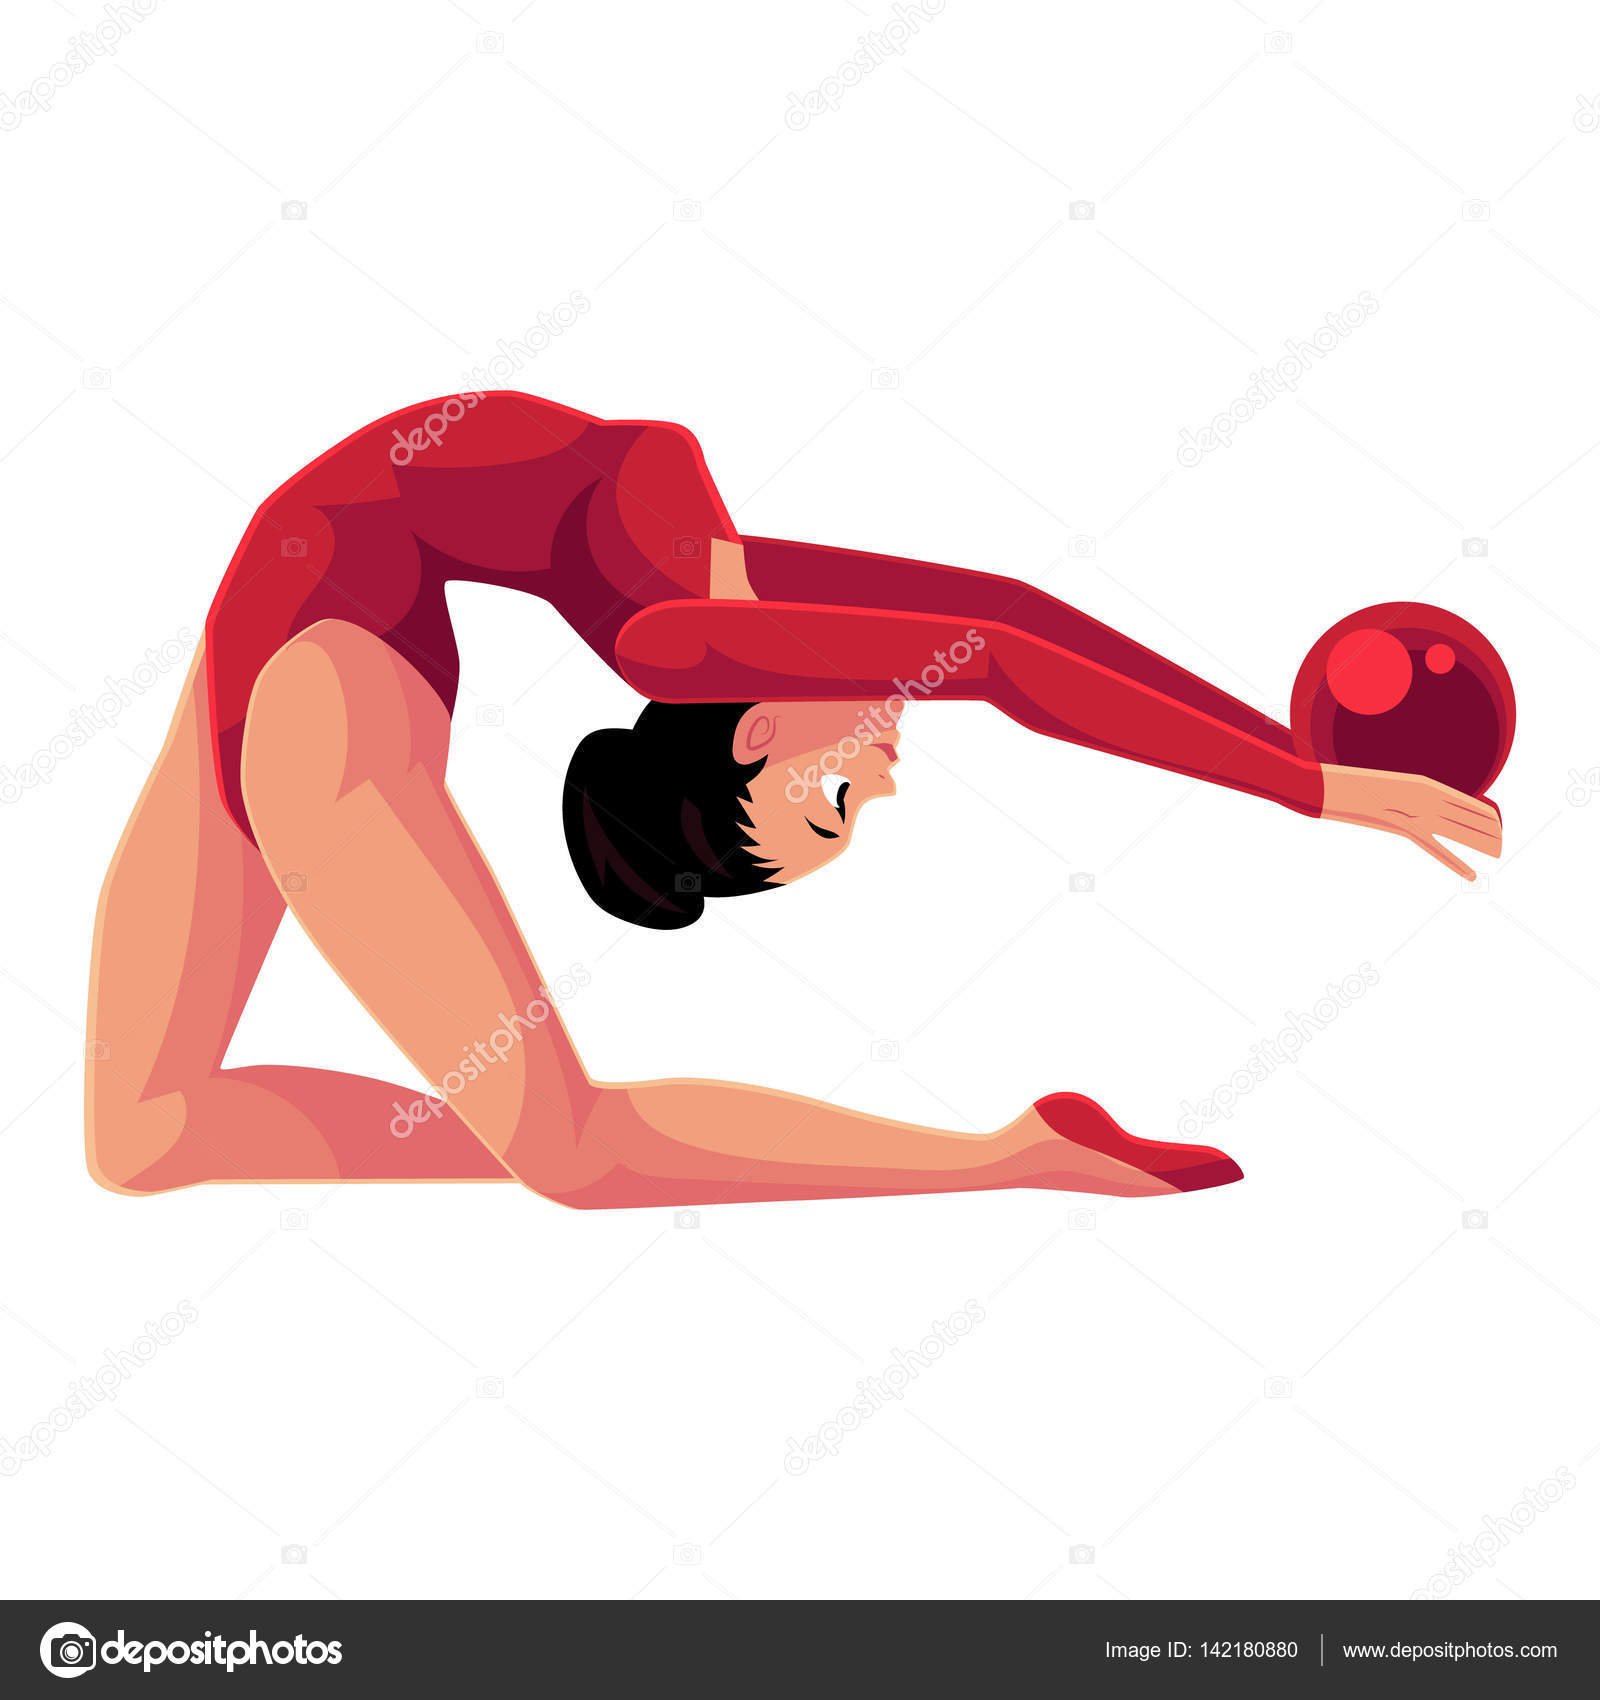 Flexible Professional Female Gymnasts Doing Rhythmic Gymnastics in Gym,  Beautiful Girls Exercising with Sports Equipment Vector Illustration, Stock vector